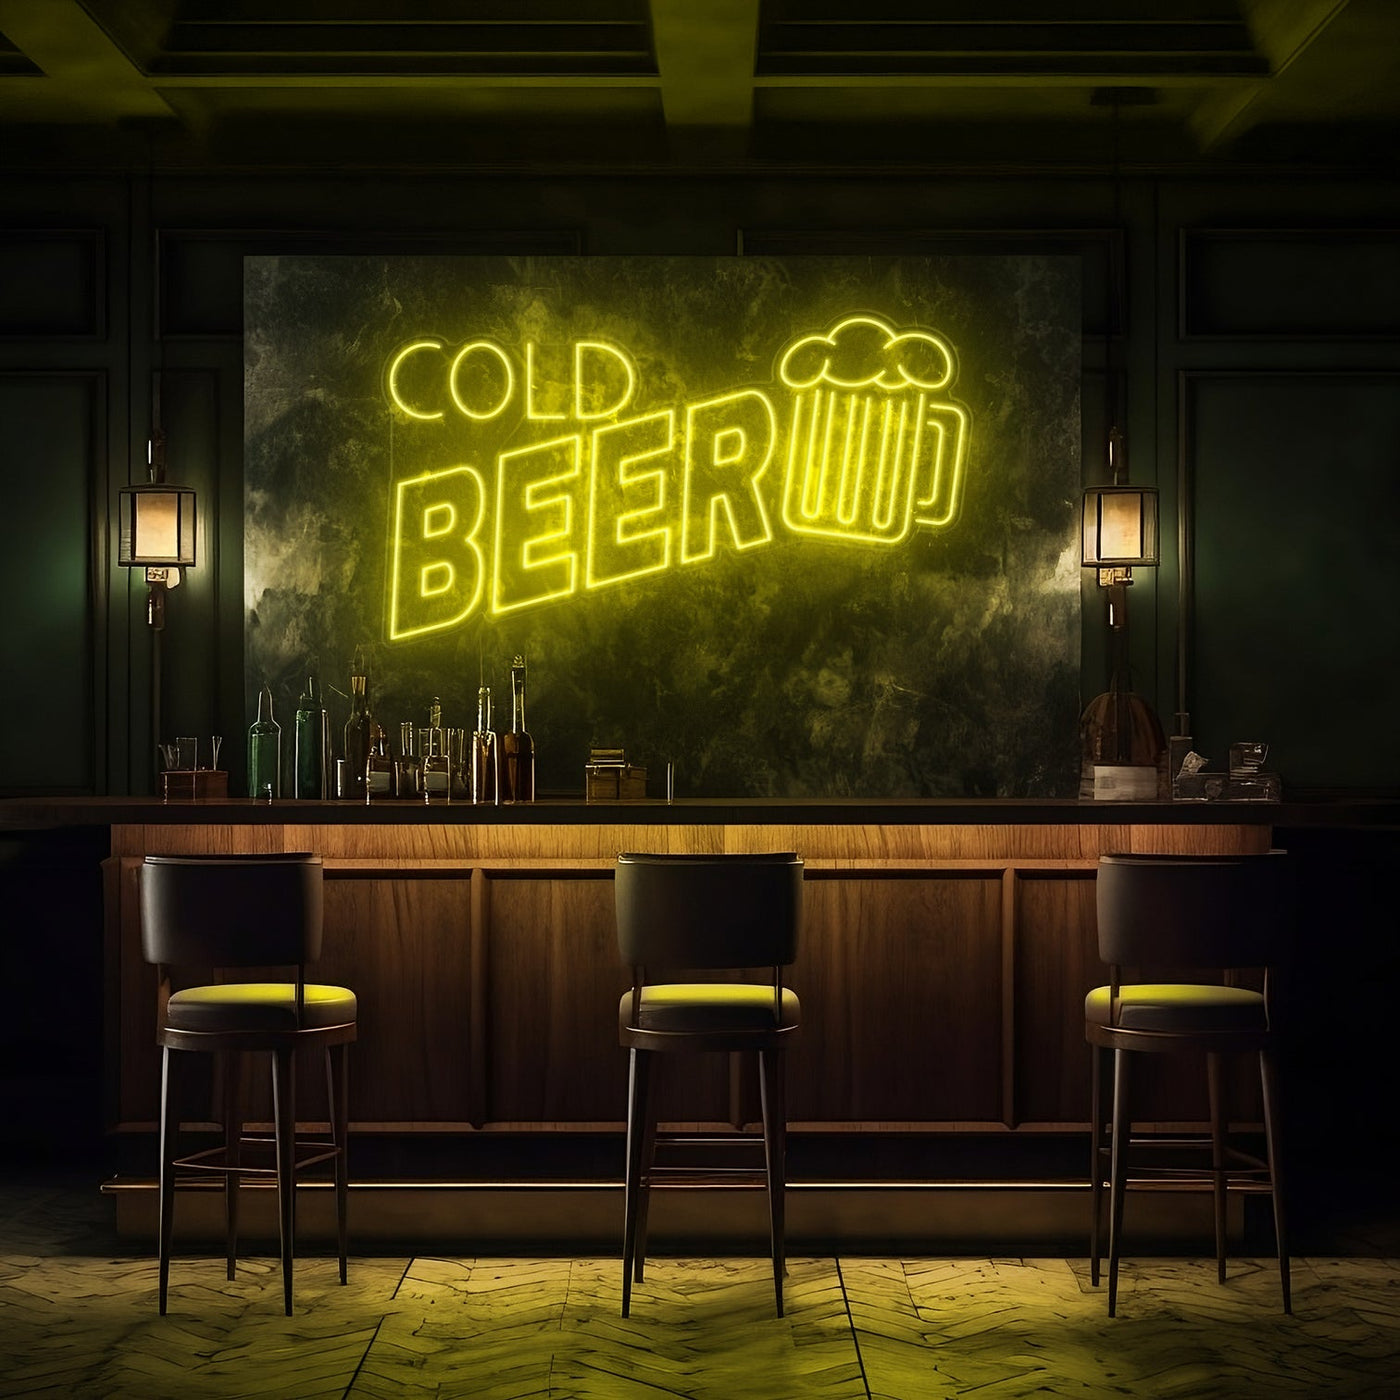 Cold Beer Bar LED Neon Sign - 30 InchTurquoise